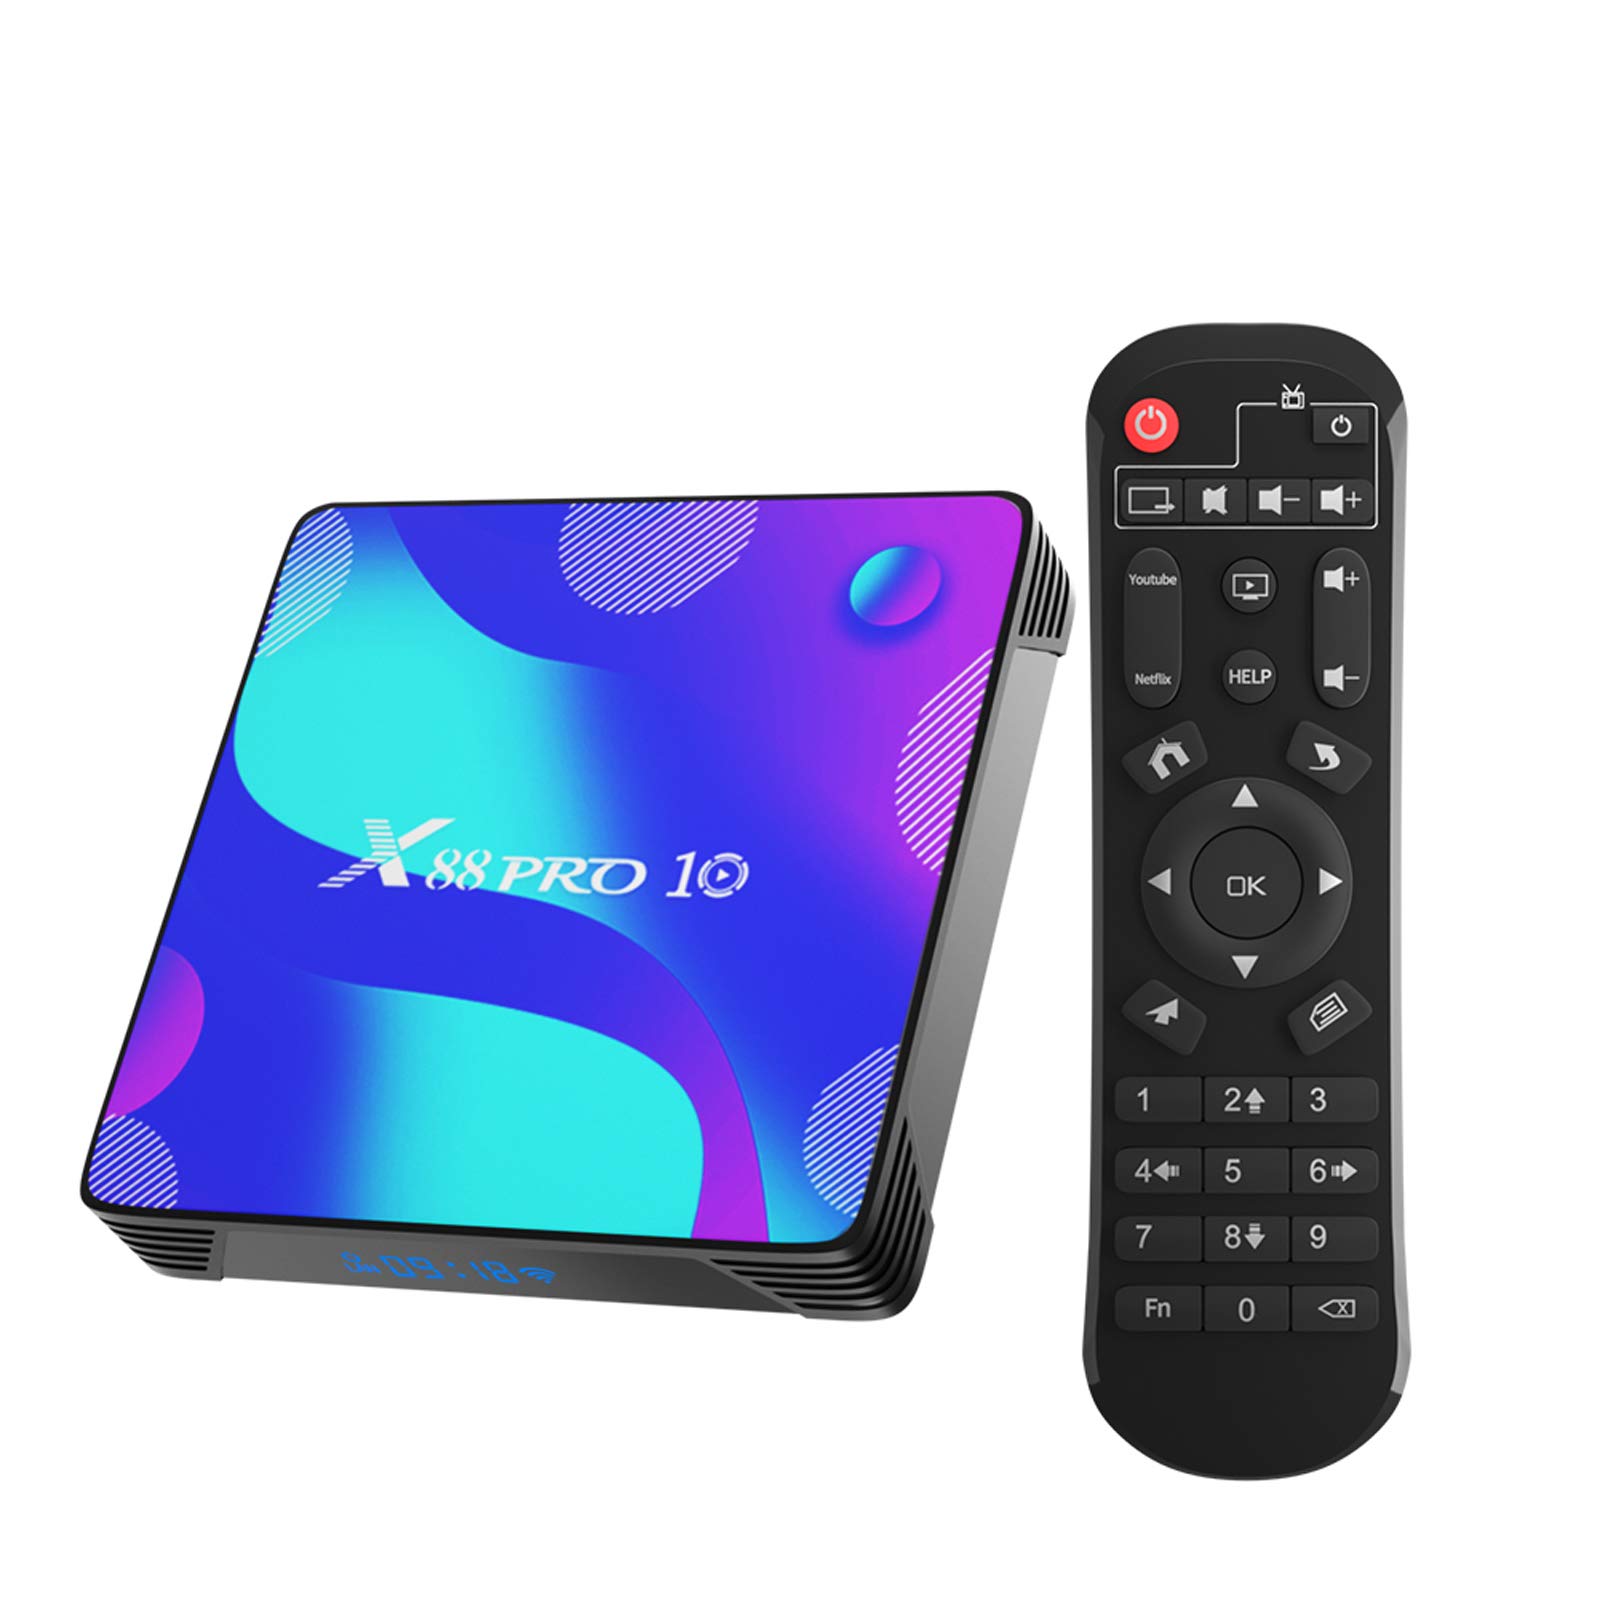 2021 Android TV Box 11.0, Android Box 2GB RAM 16GB ROM RK3318 Quad-Core Support 2.4G/5.8G Dual WiFi BT 4.0 Ethernet LAN 3D 4K TV Box